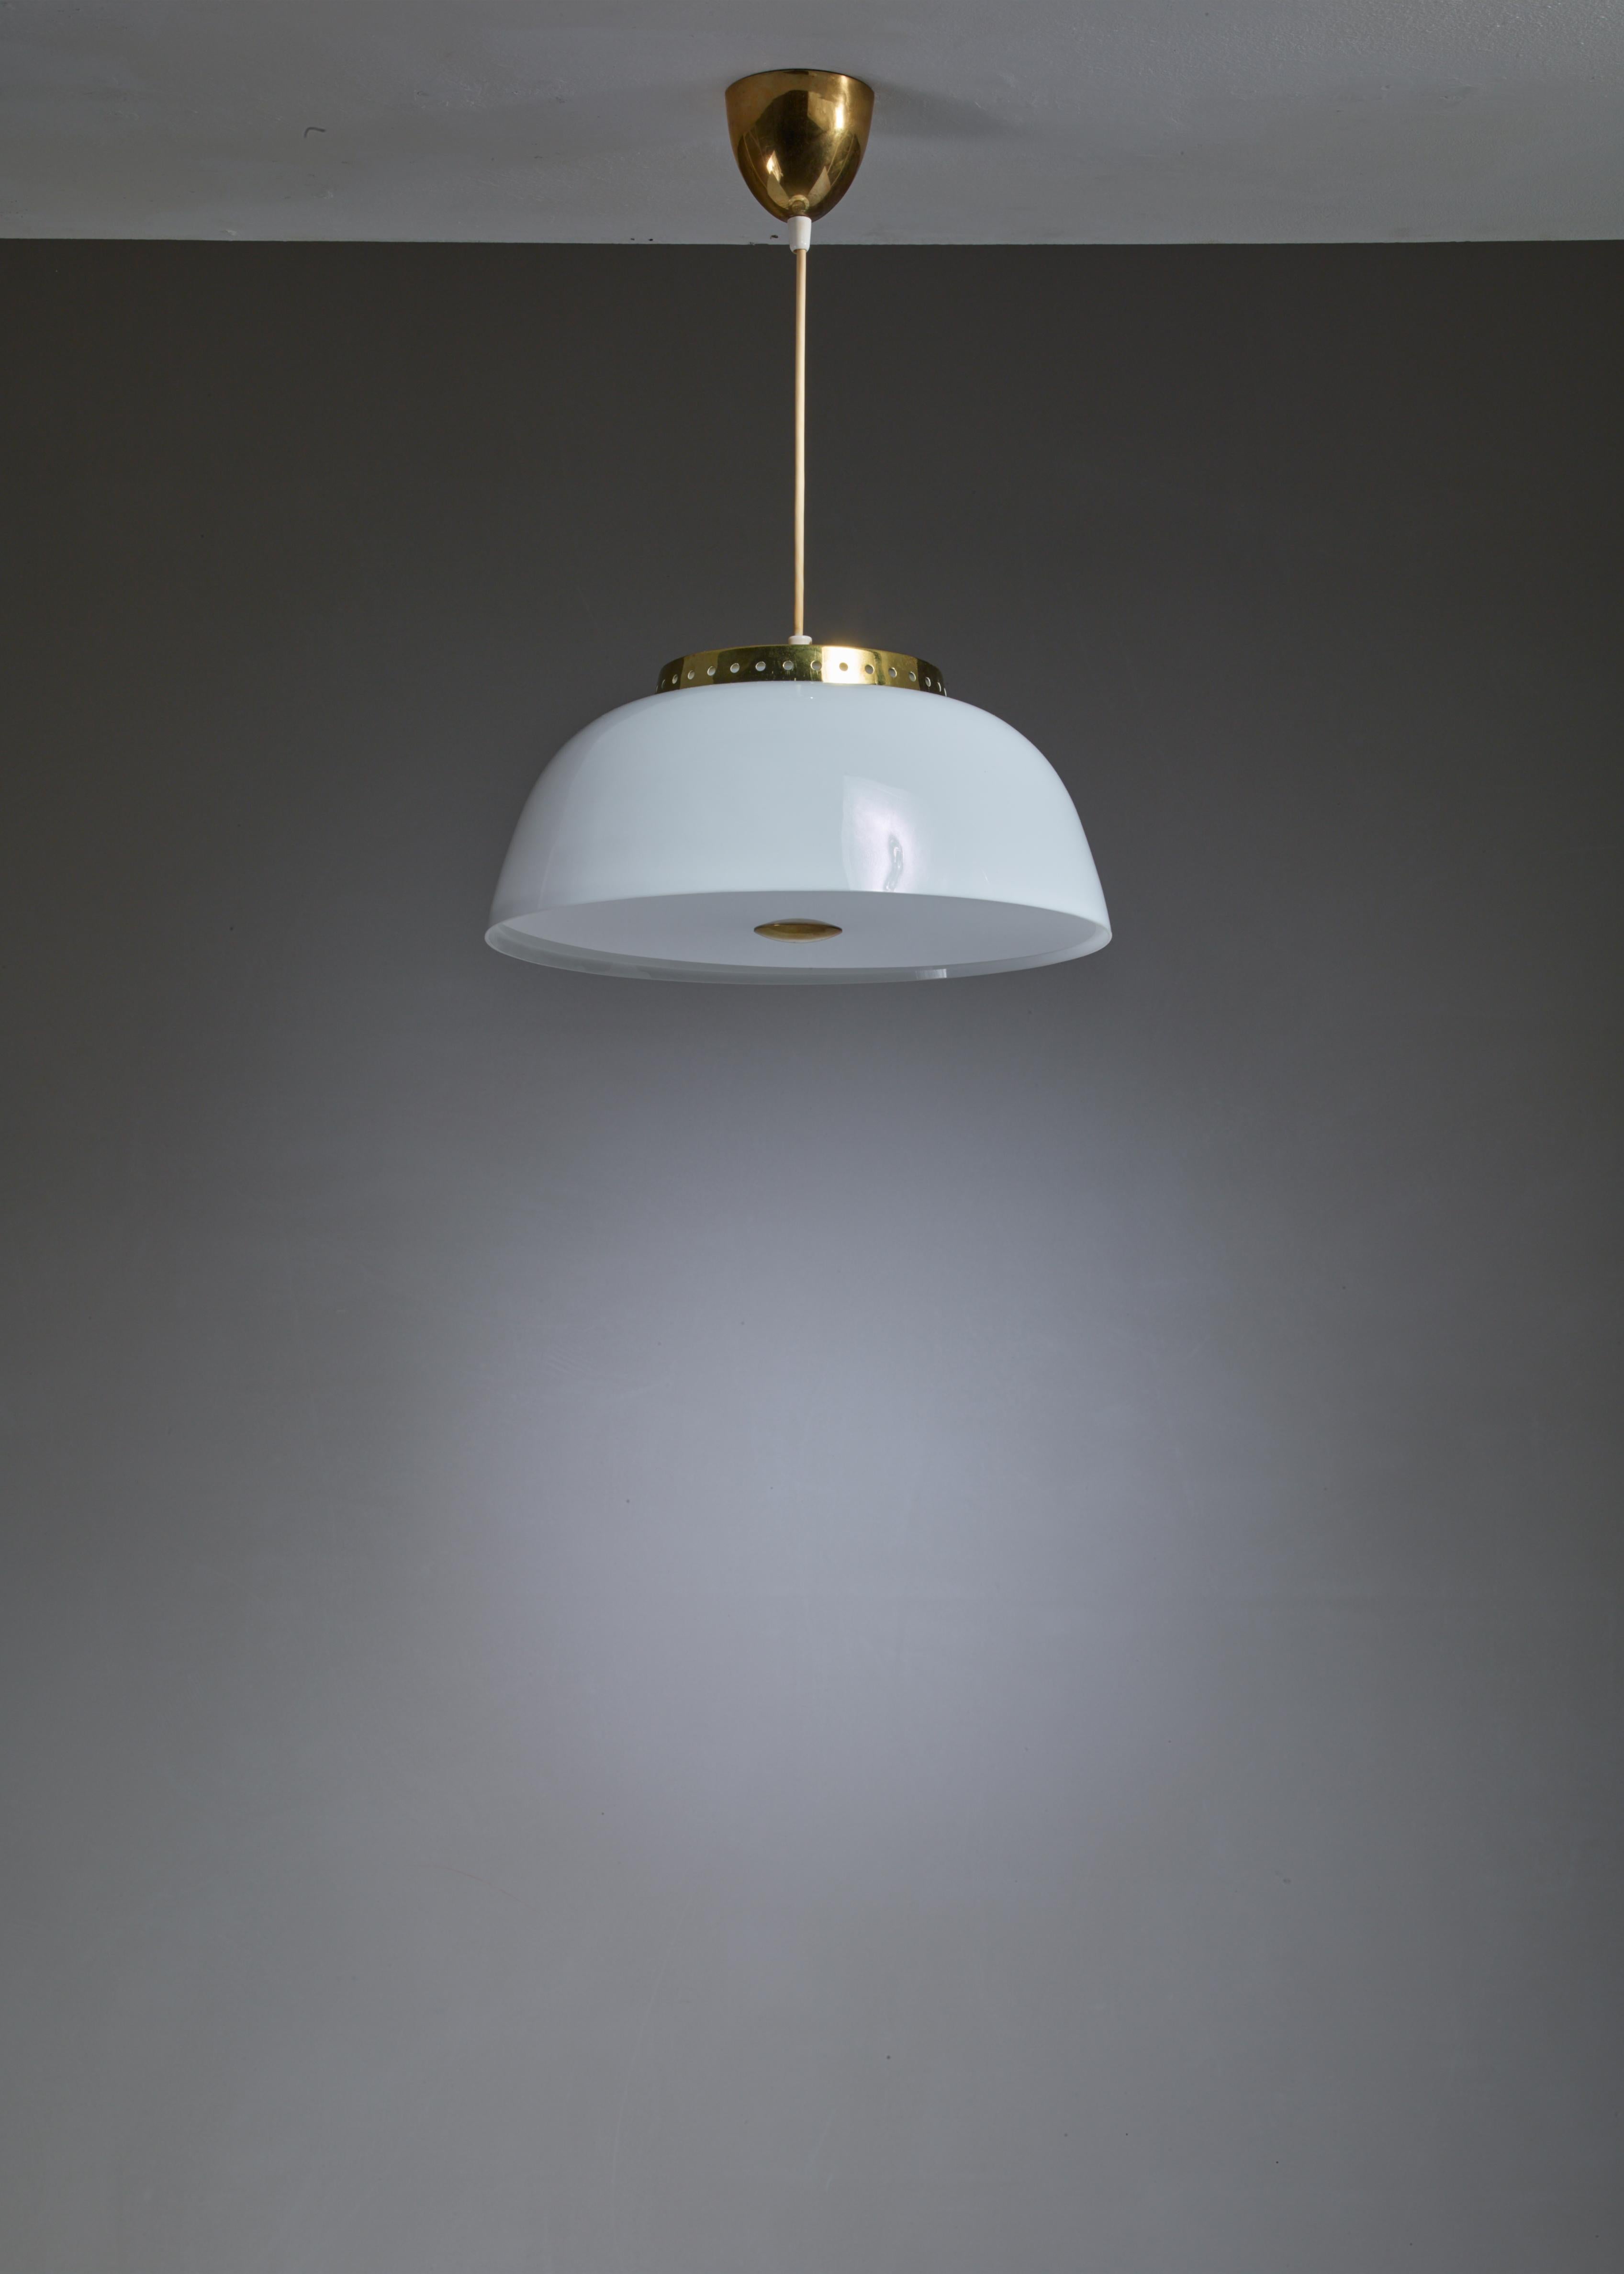 A pendant lamp made of an acrylic shade with a brass crown, designed by Lisa Johansson-Pape for Orno. The lamp has two light bulbs and an acrylic diffuser on top and underneath.
This lamp is a variation on the model 61-334 pendant, which has a